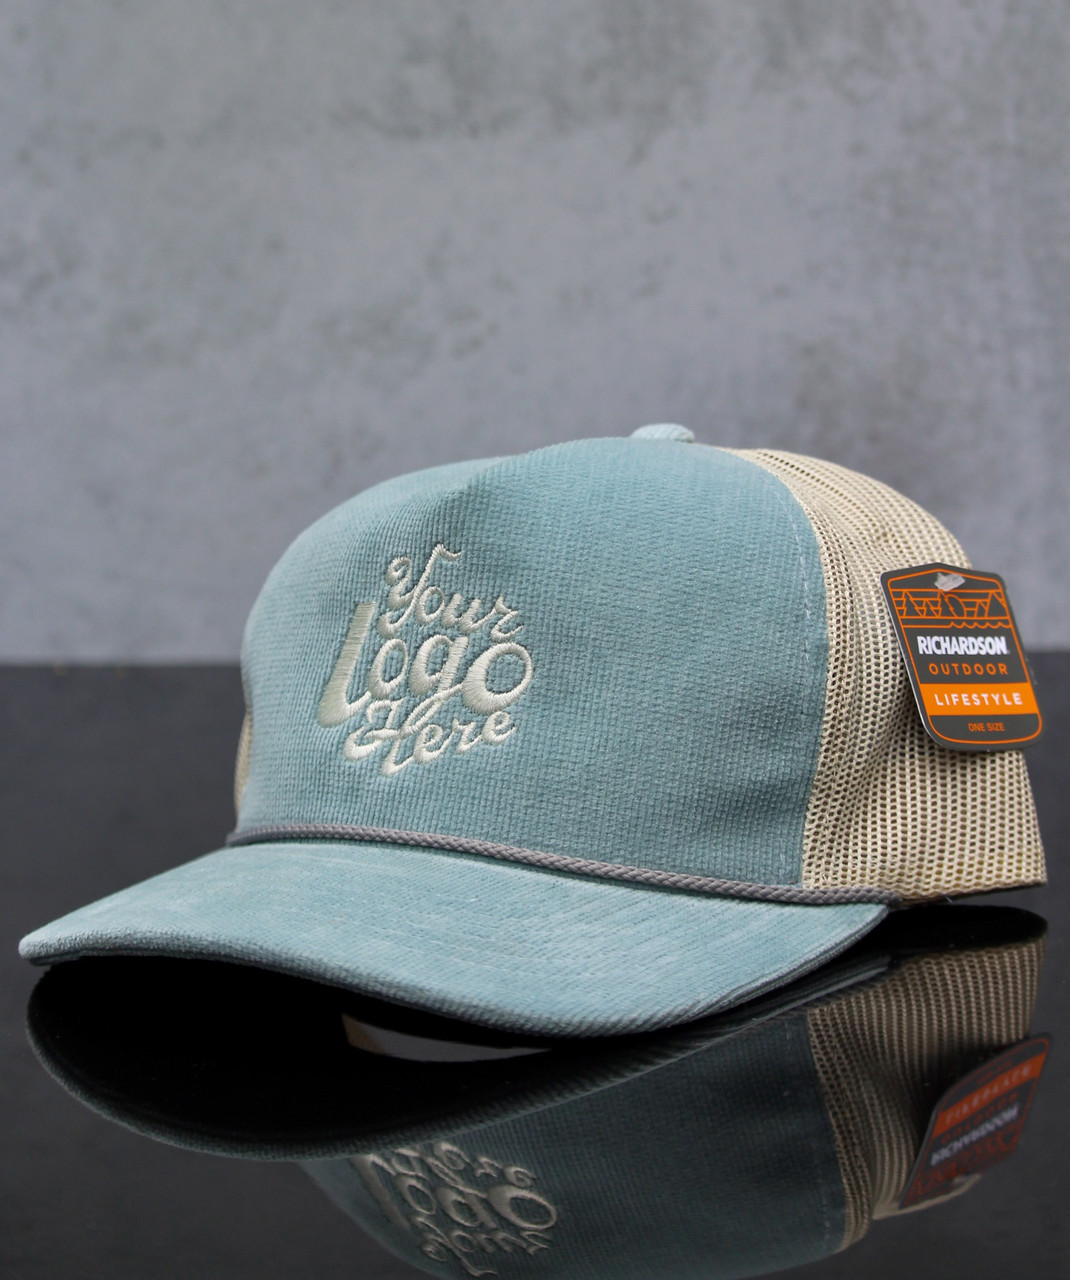 930 Trucker Troutdale Custom To You - Embroidered - Corduroy Caps Cap